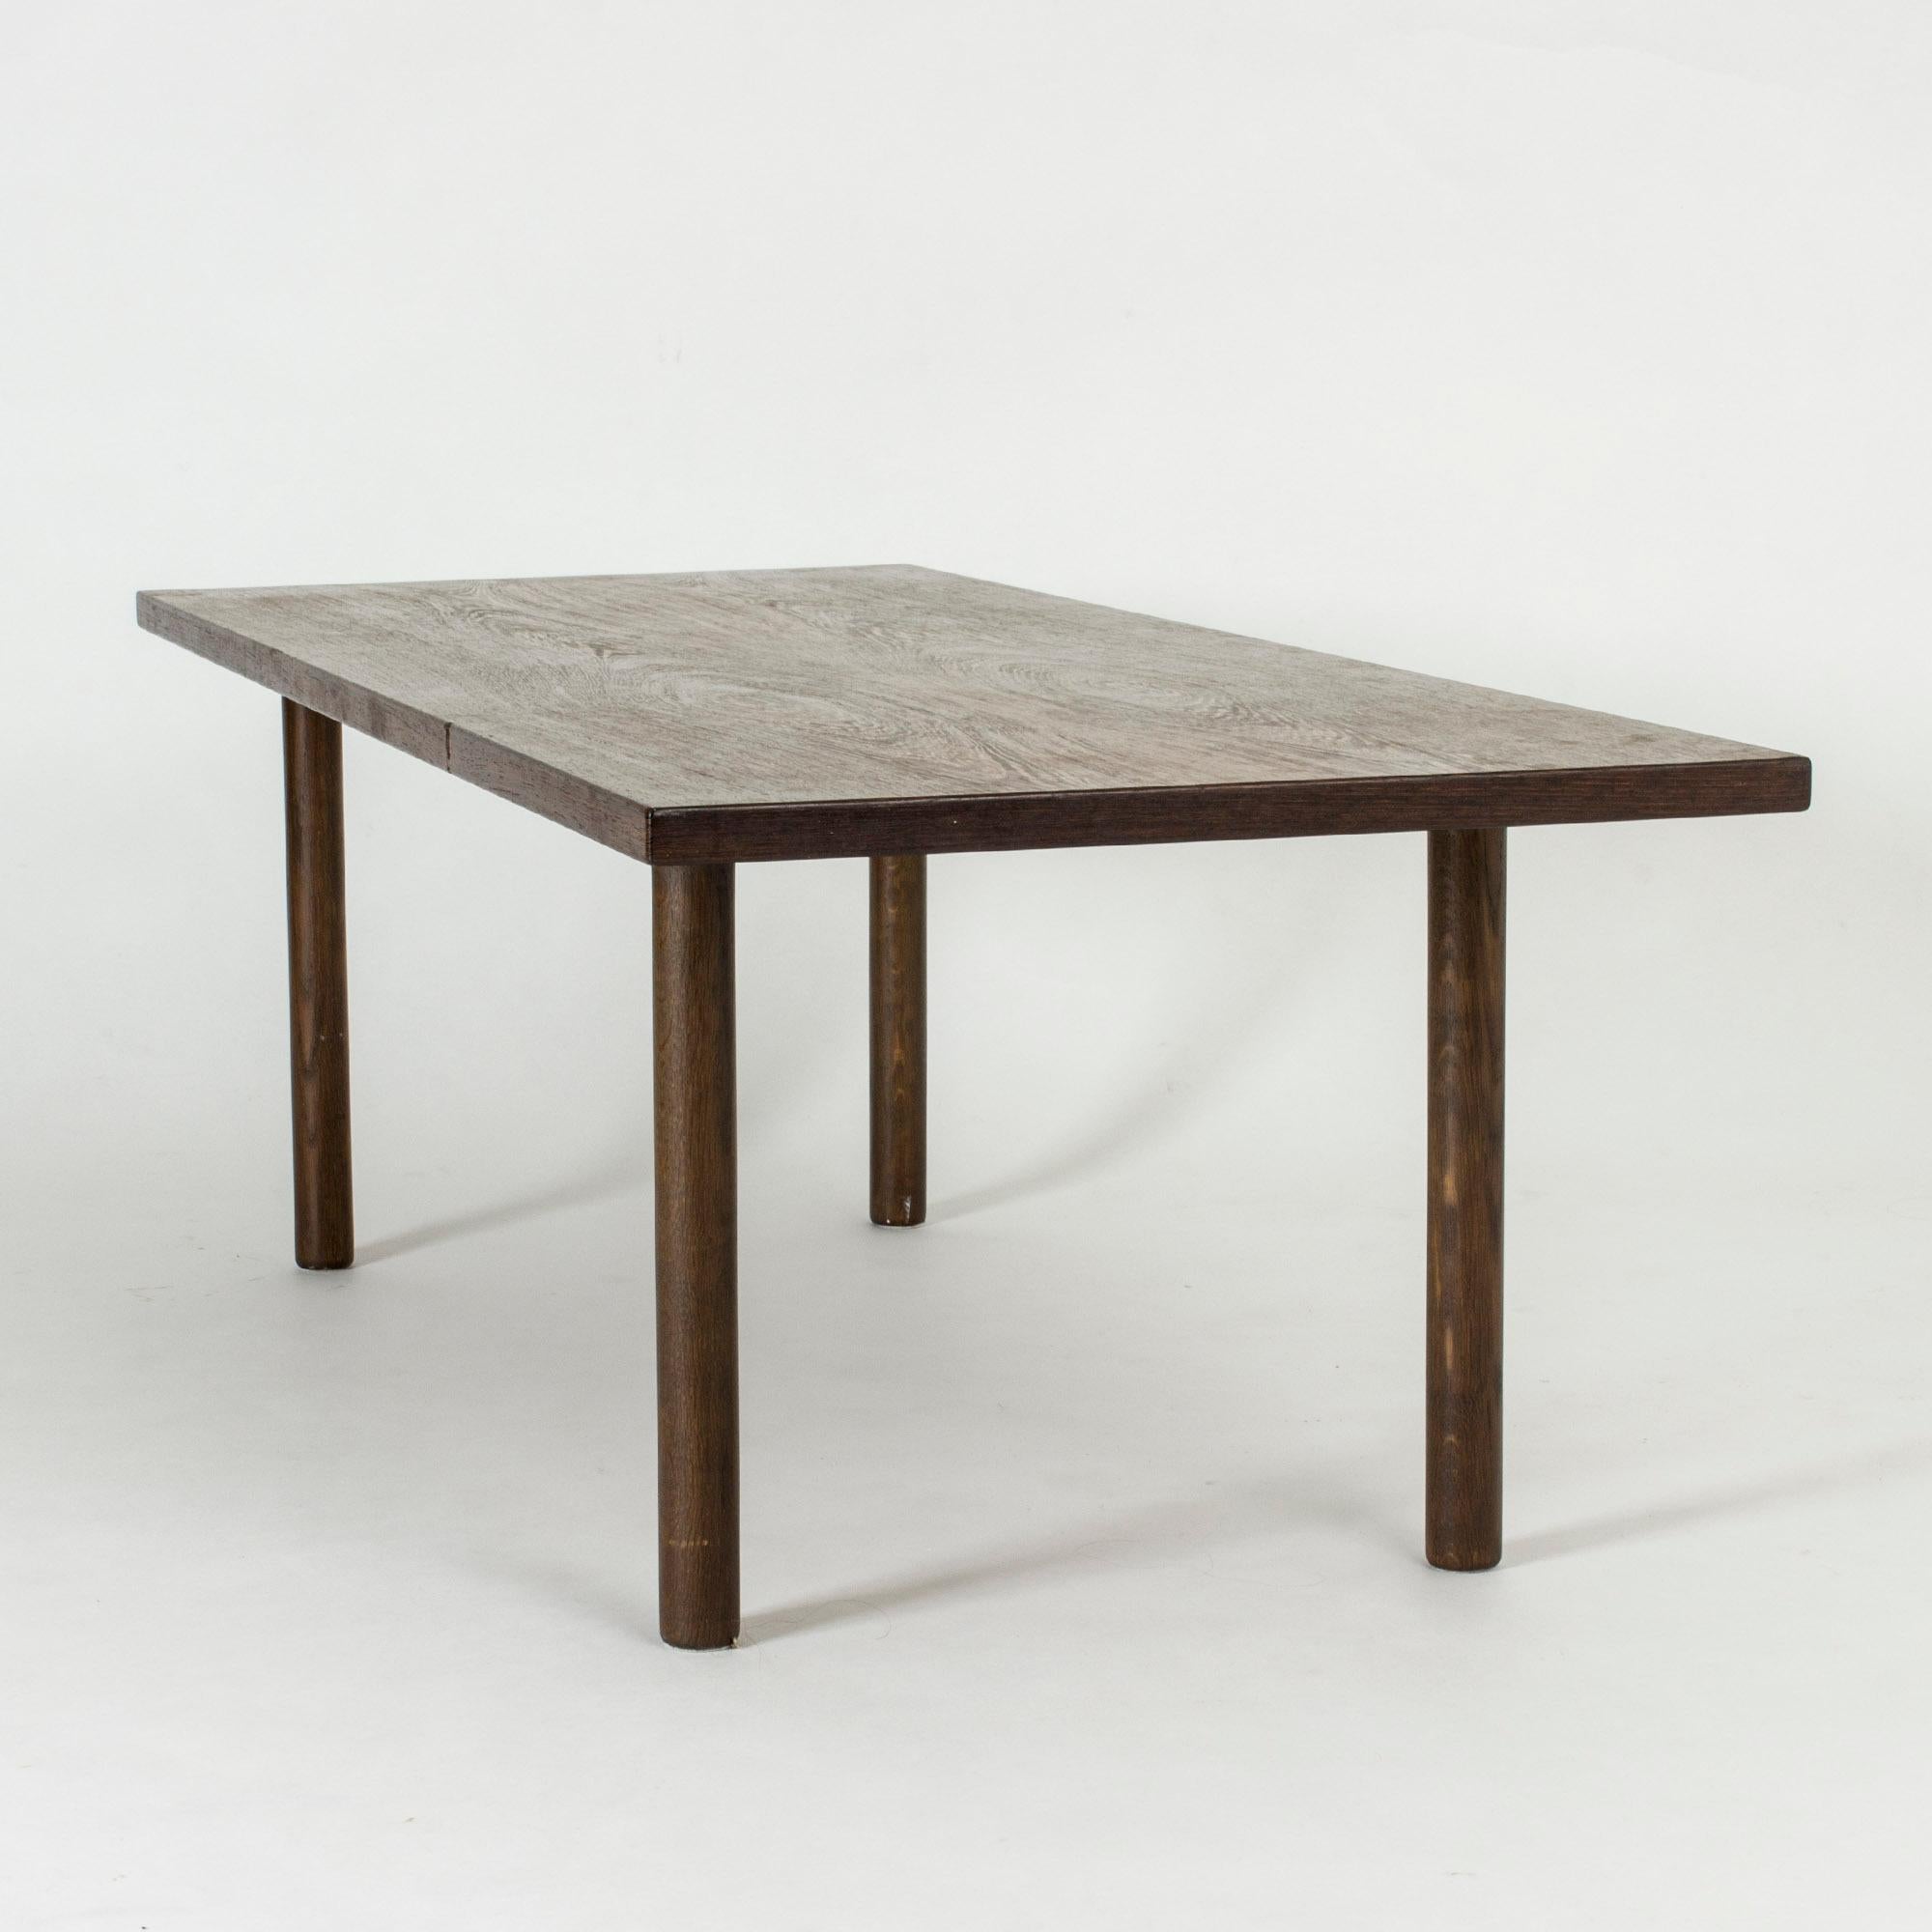 Coffee table by Hans J. Wegner, in a clean, balanced design. Striking Wenge tabletop and round stained oak legs.